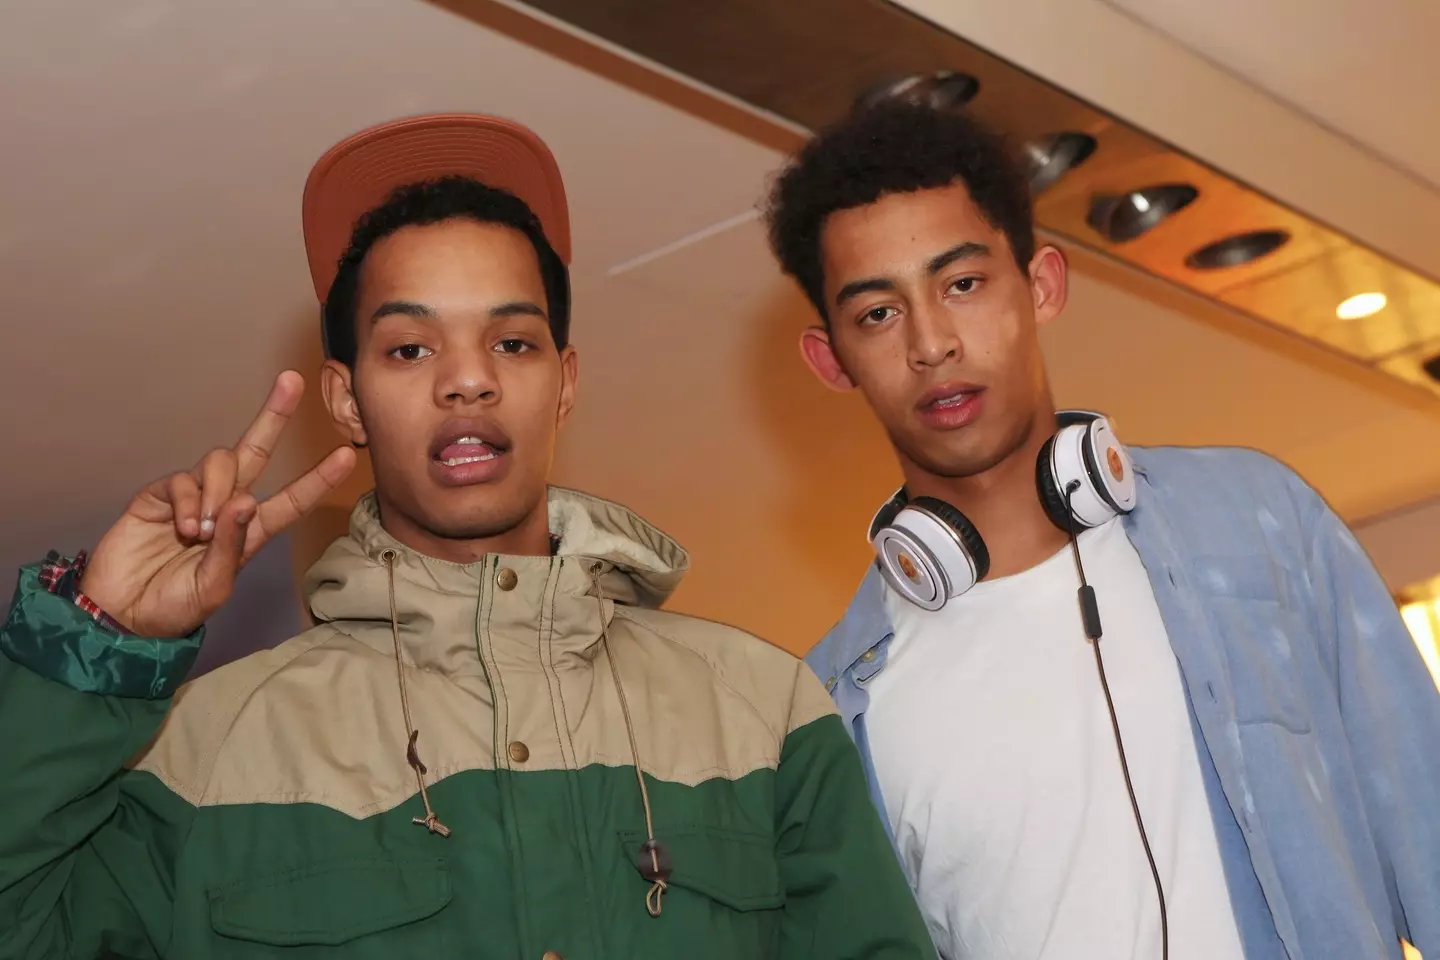 The members of Rizzle Kicks have been working on their own projects after rising to fame.